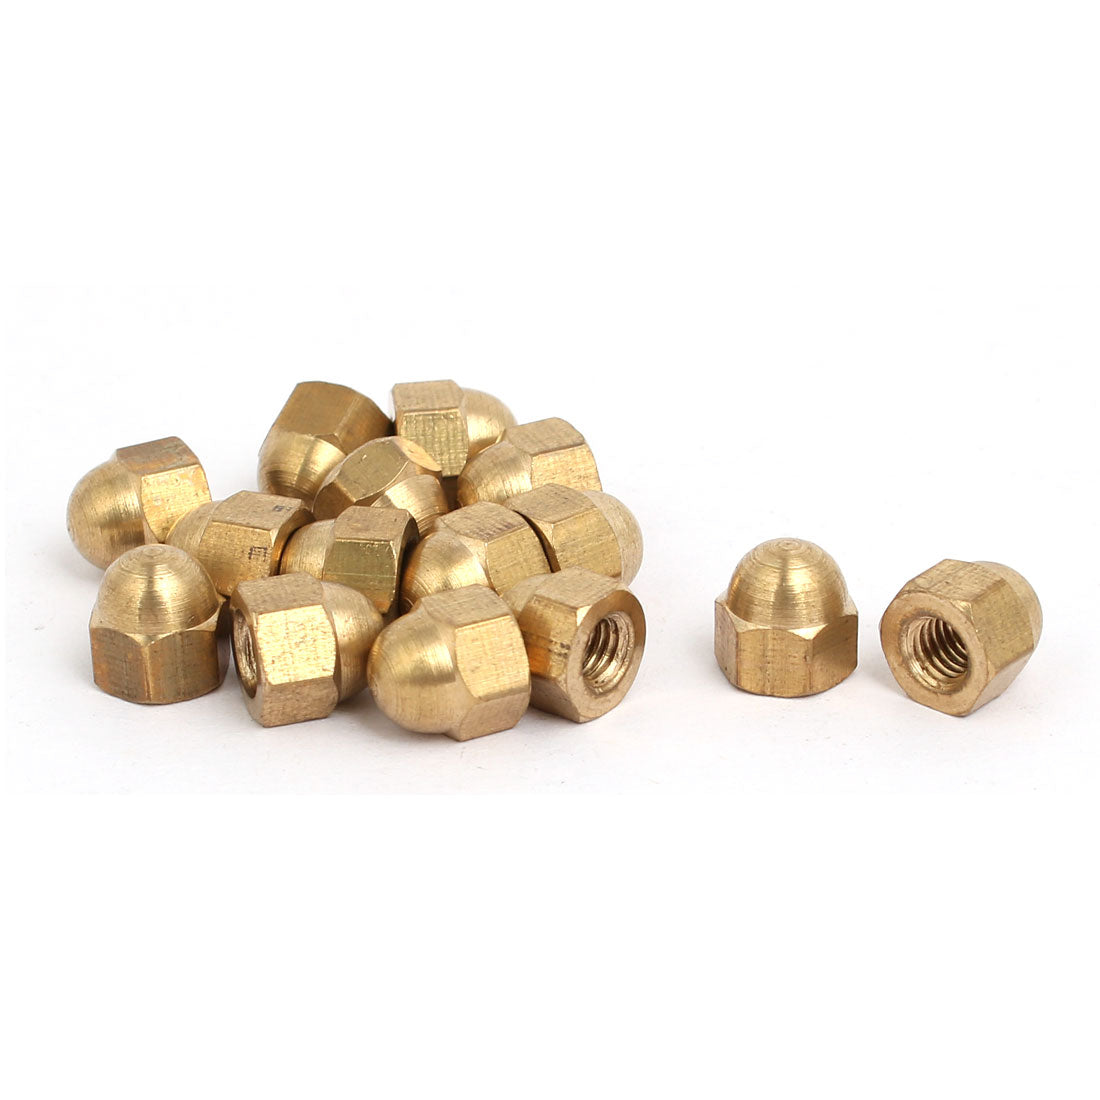 uxcell Uxcell 15pcs M4 Female Thread Nut DIN1587 Dome Cap Head Hex Brass Tone